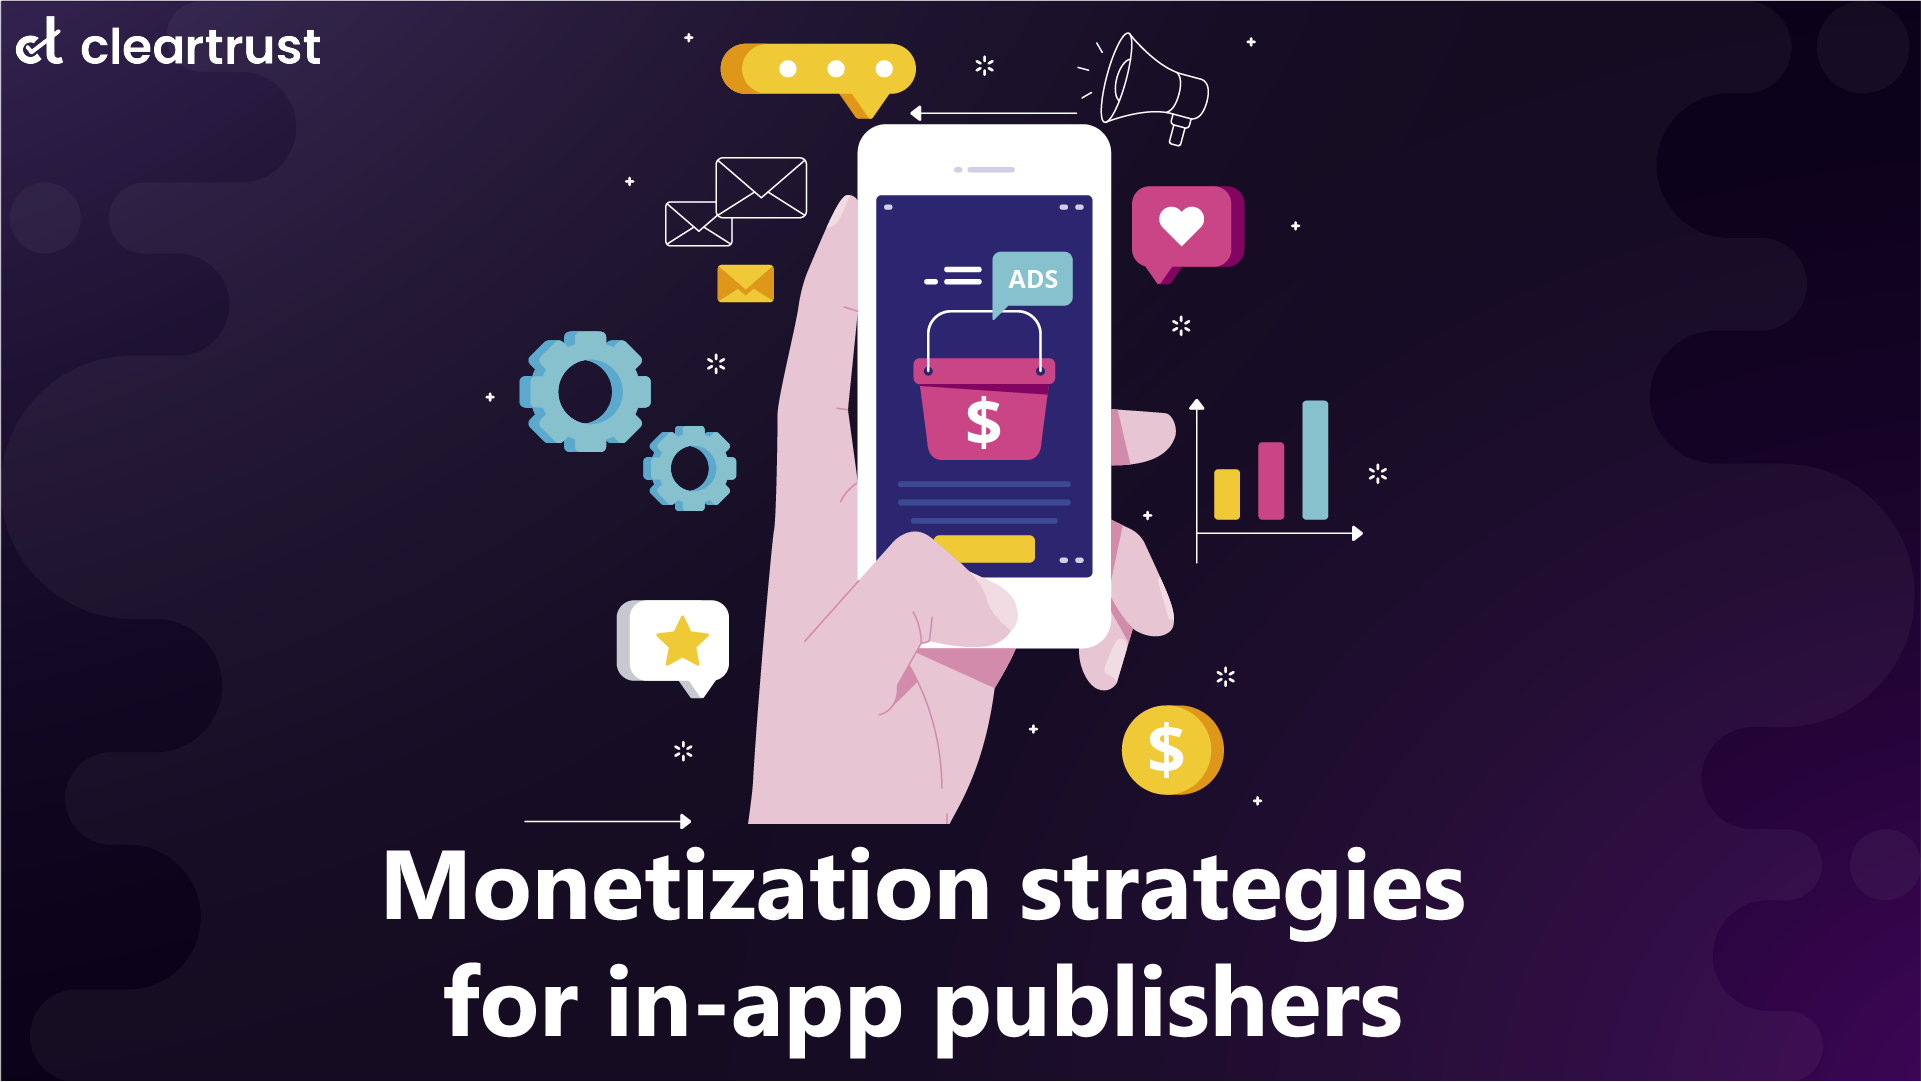 Ad Monetization strategies for in-app publishers